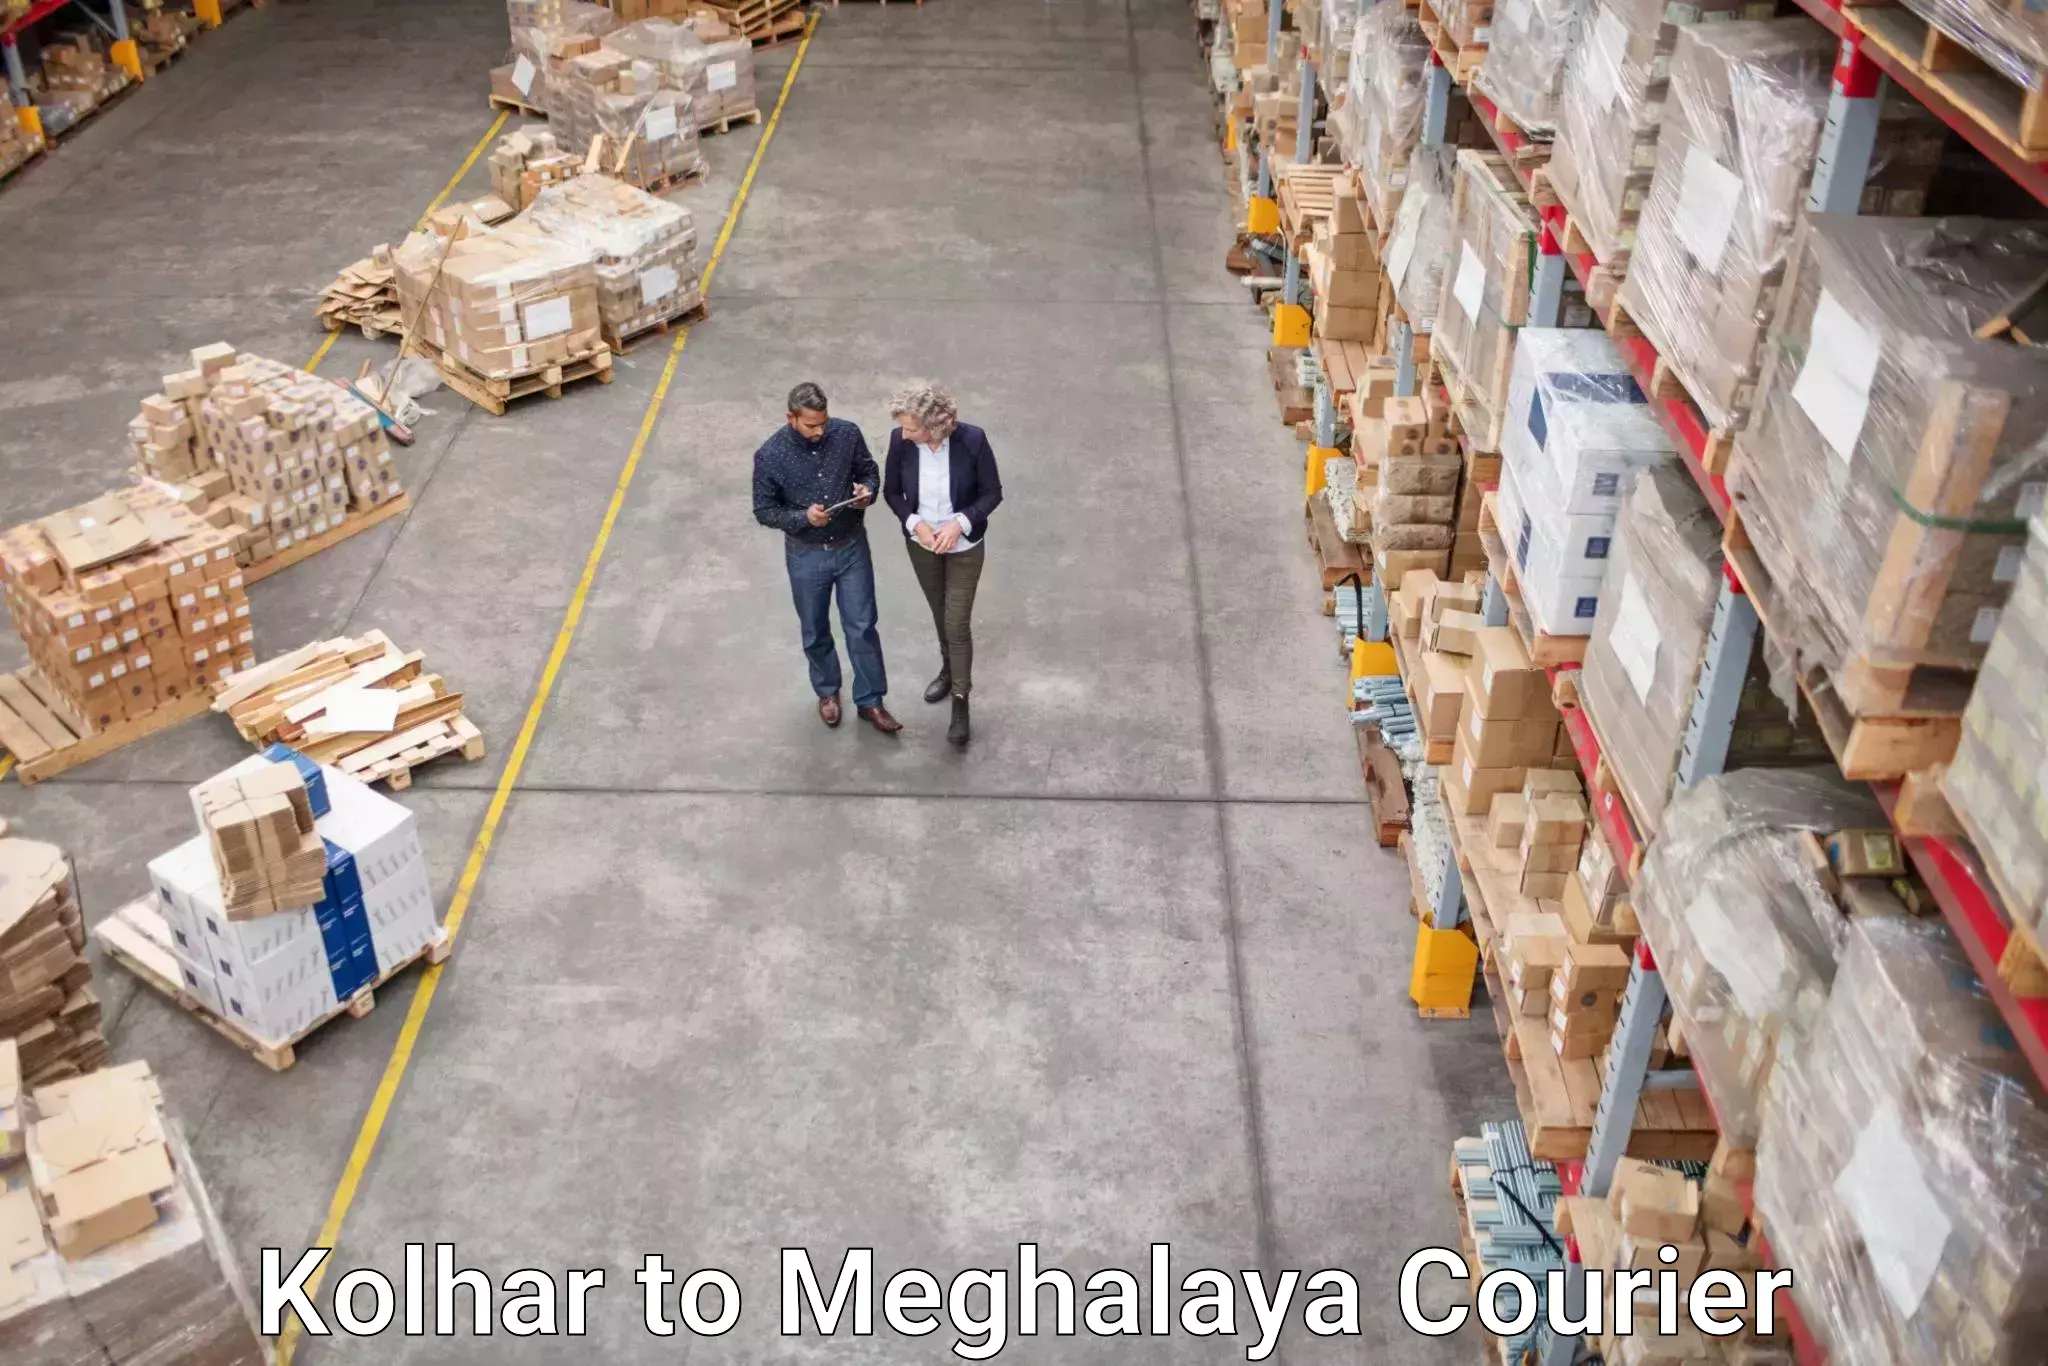 Customer-oriented courier services Kolhar to Meghalaya